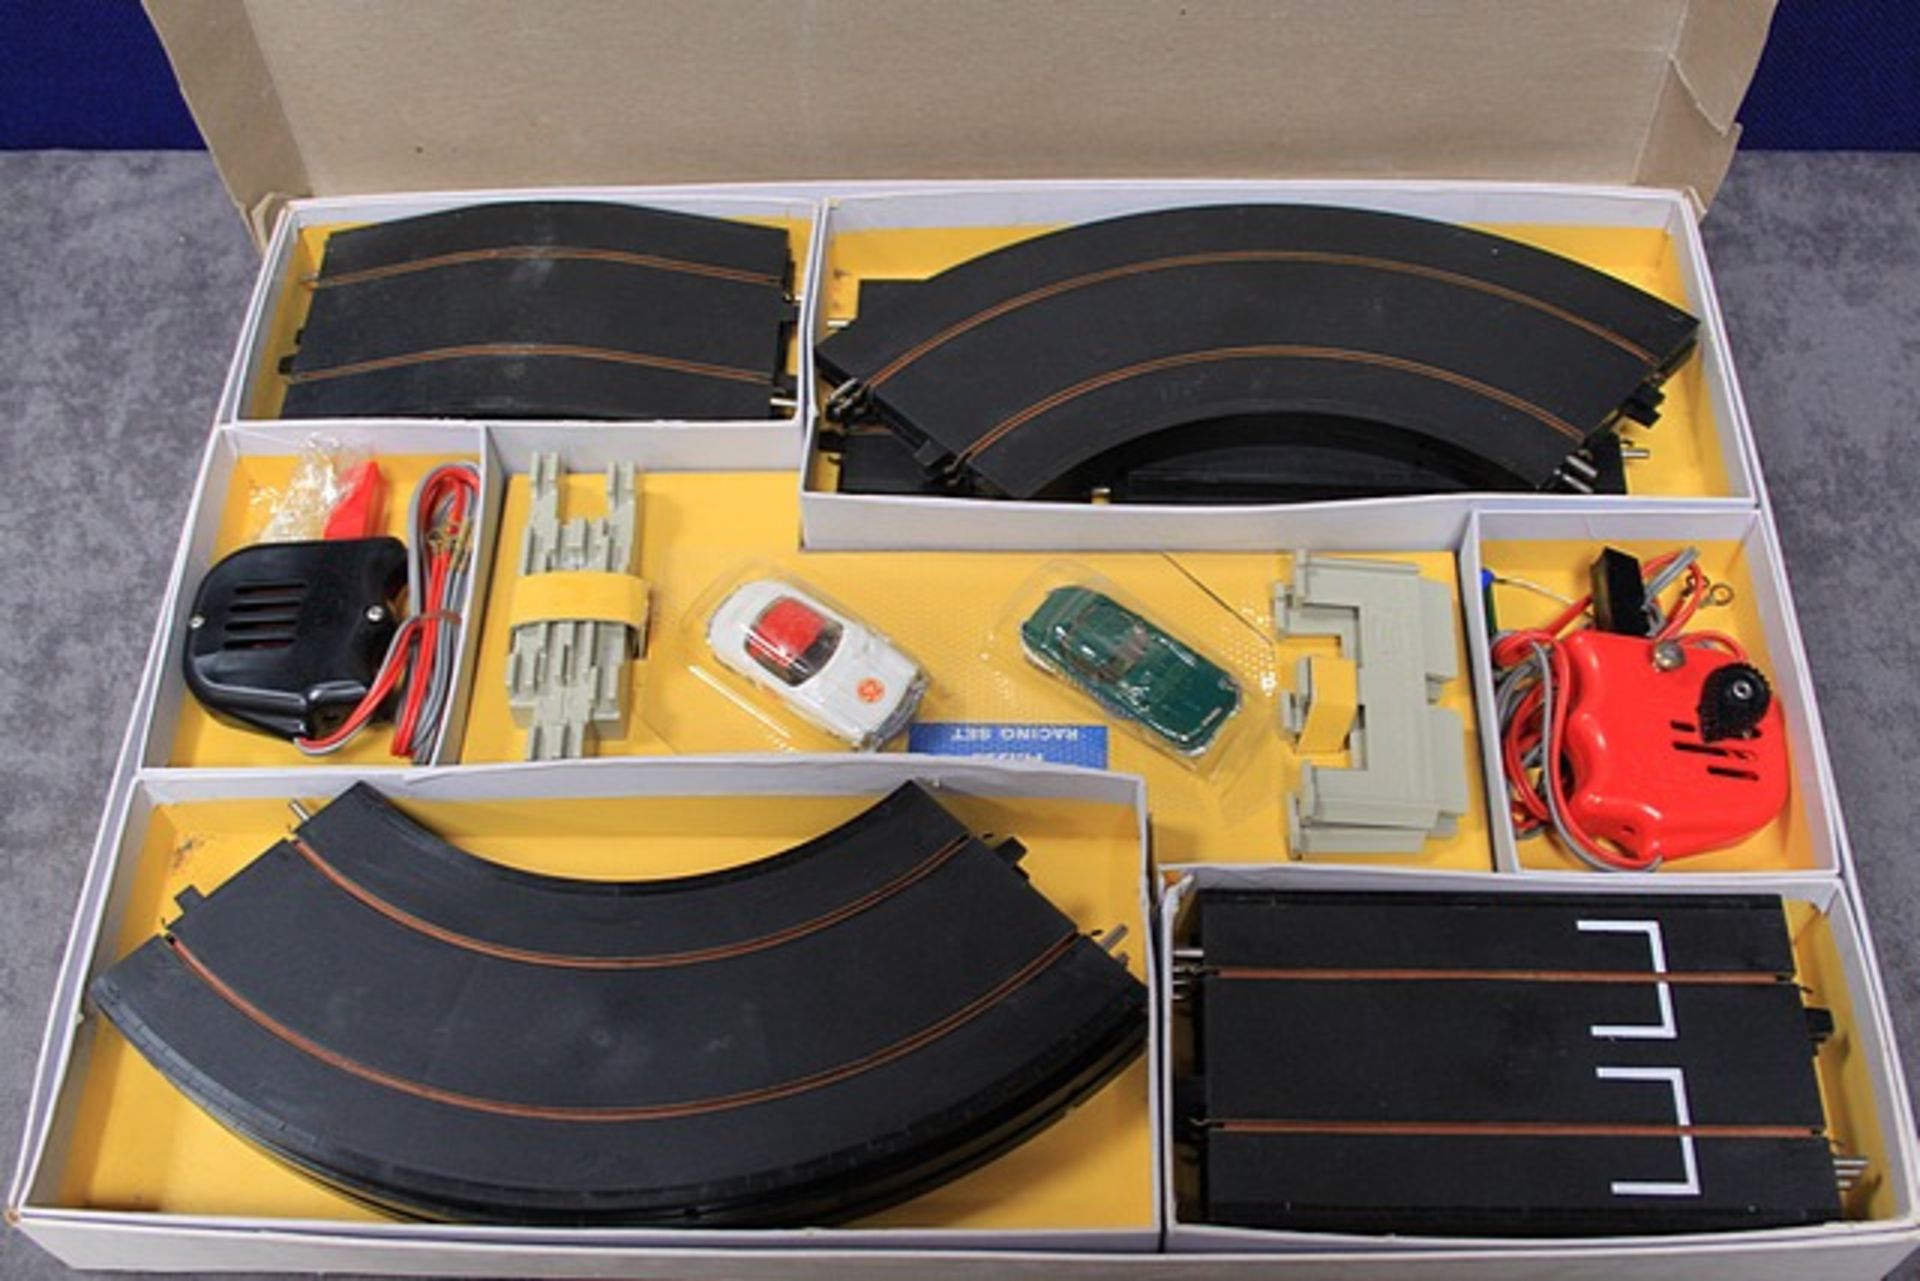 Triang Minic Motorways racing set M.1522 including two cars in box